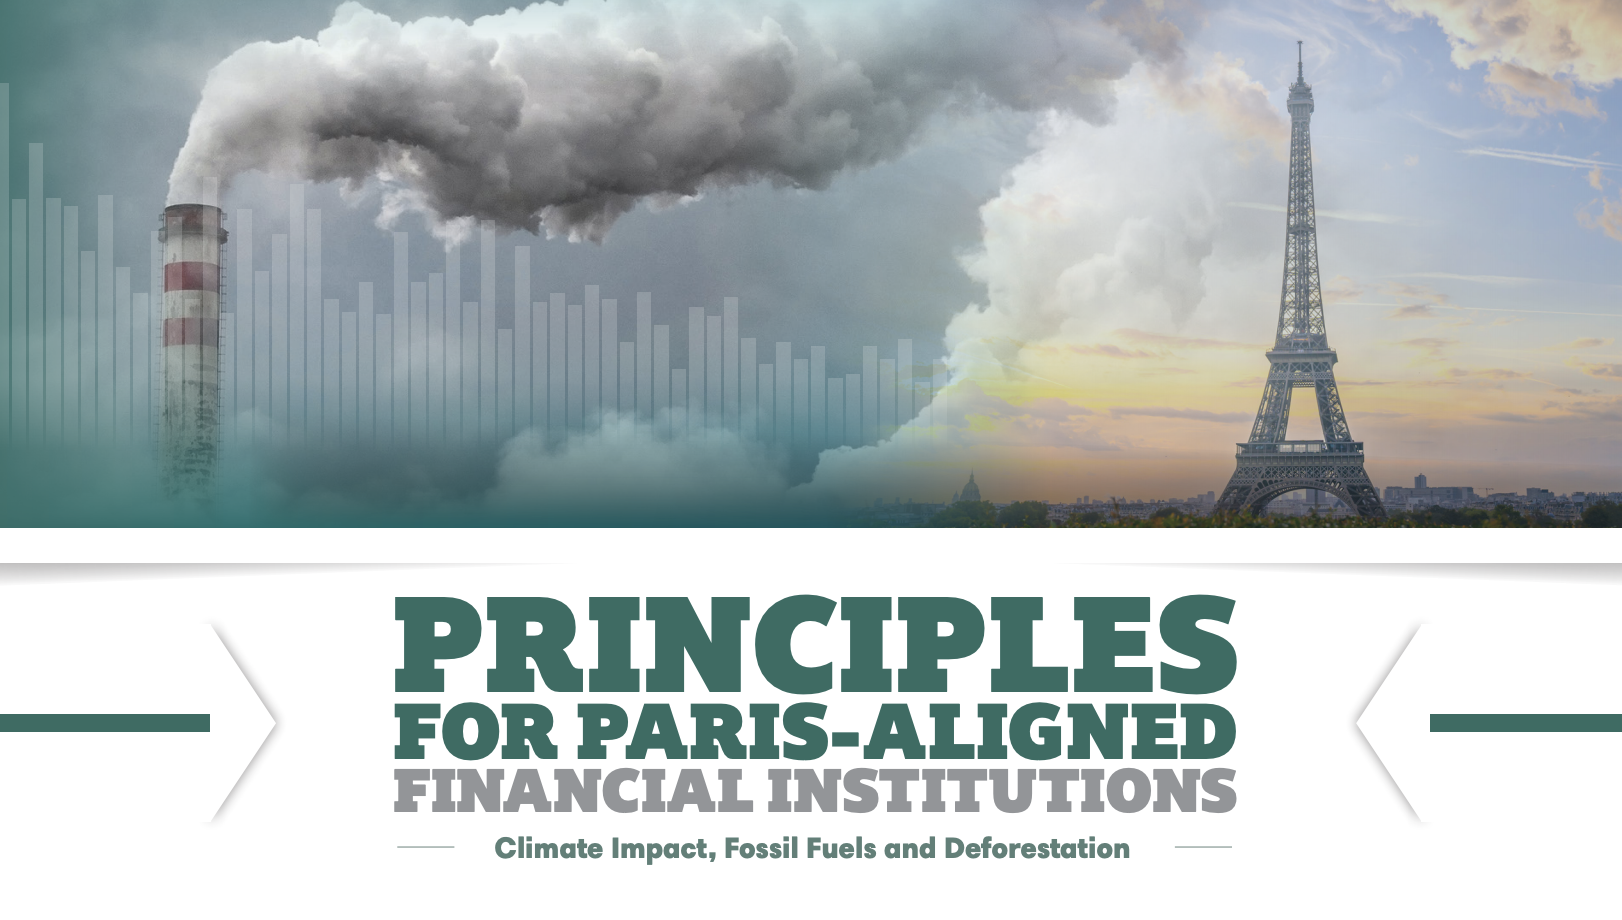 Principles for Paris-Aligned Financial Institutions: Climate Impact, Fossil Fuels, and Deforestation